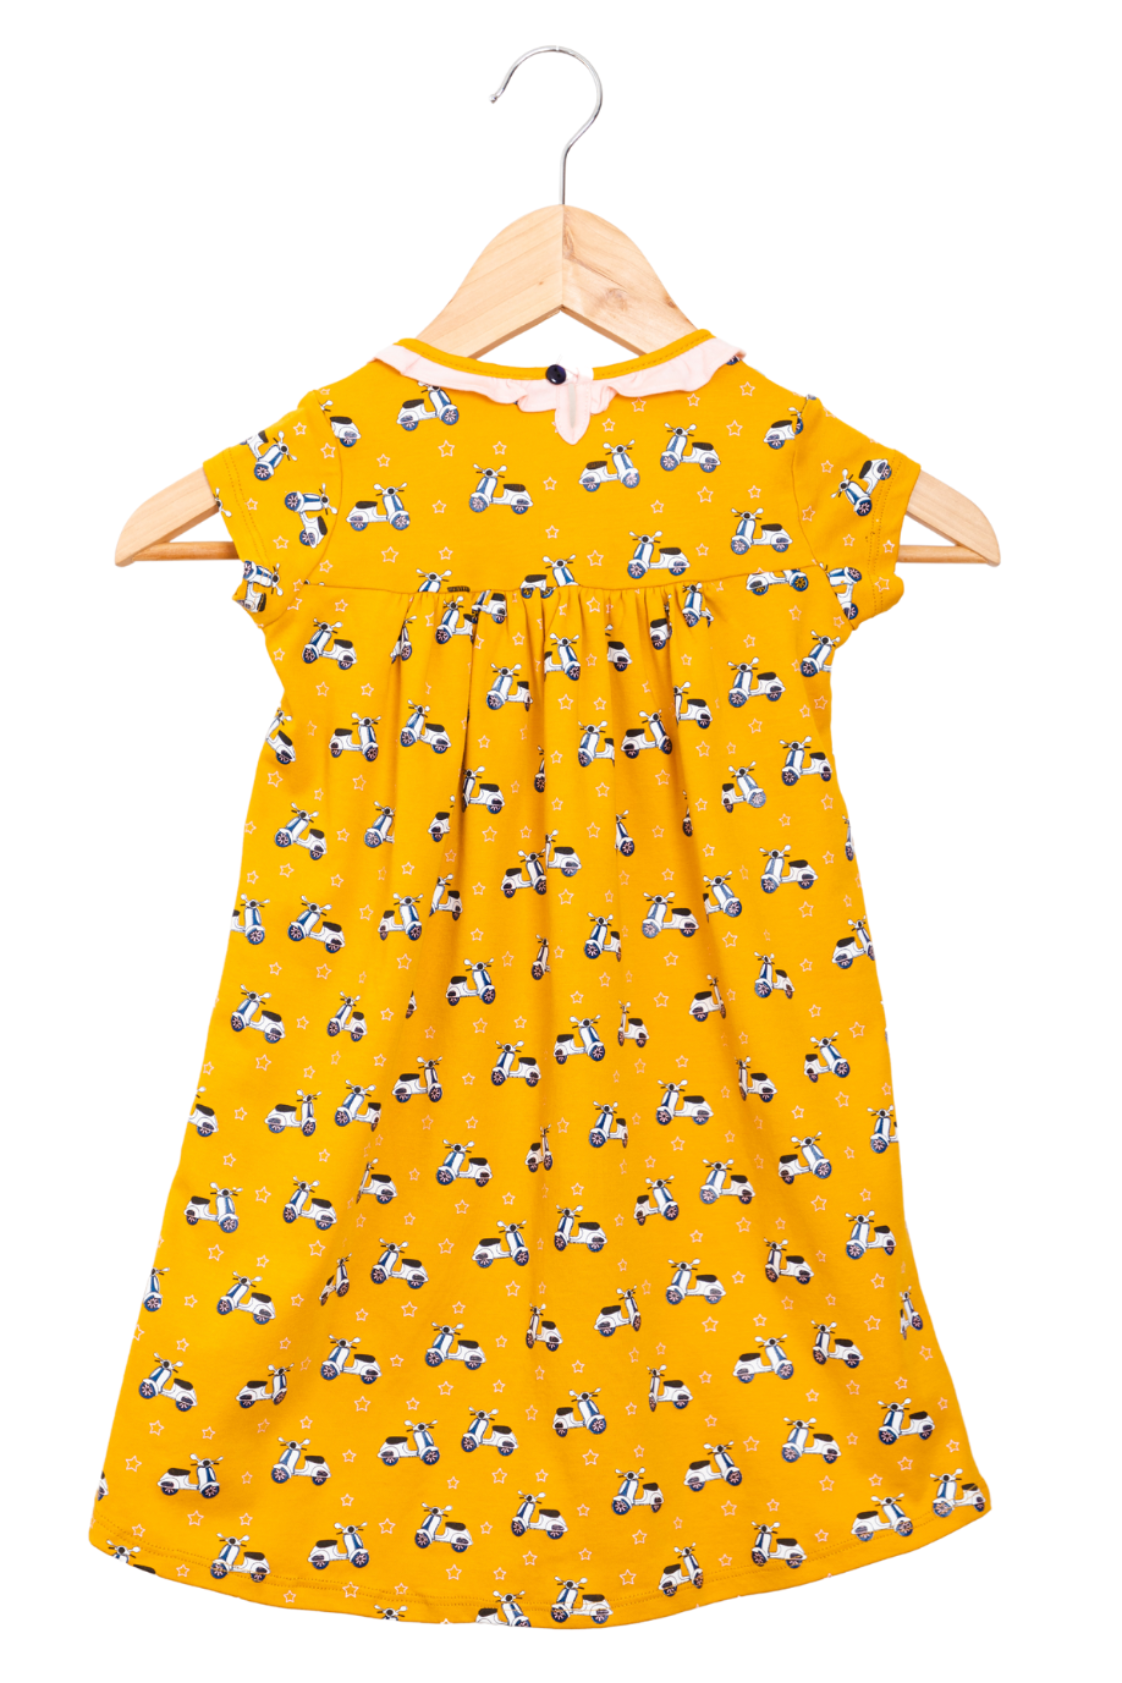 Vespa dress in yellow, eco-friendly materials, front pockets and non-stereotypes design.